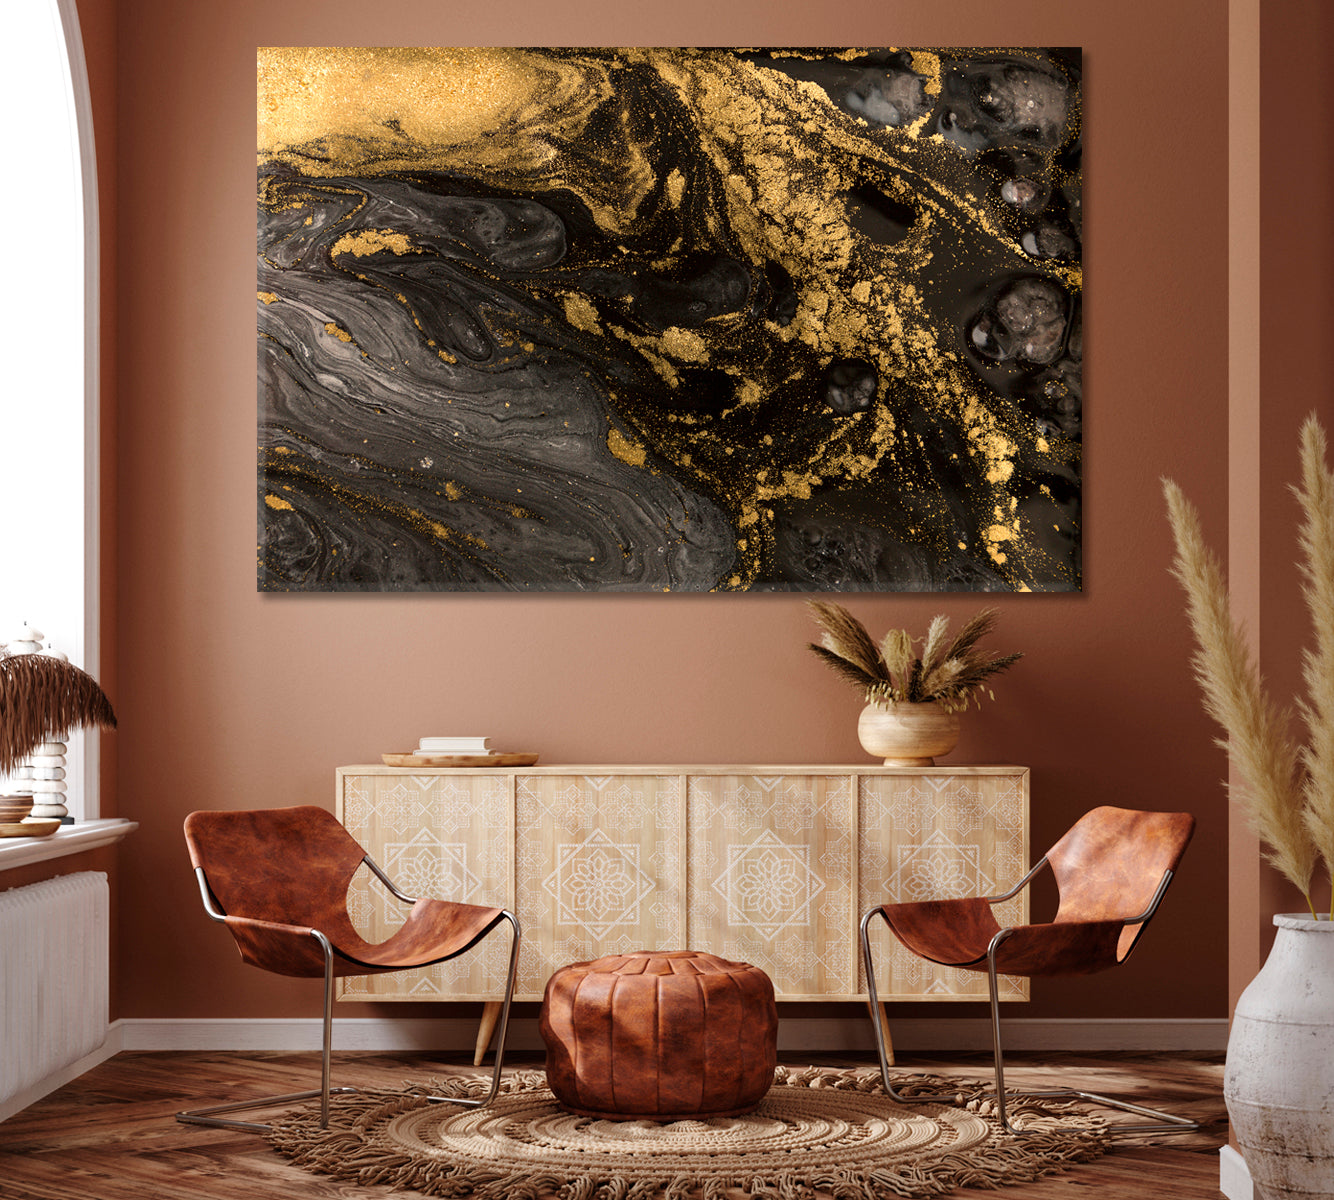 Gray and Gold Liquid Marble Pattern Canvas Print ArtLexy 1 Panel 24"x16" inches 